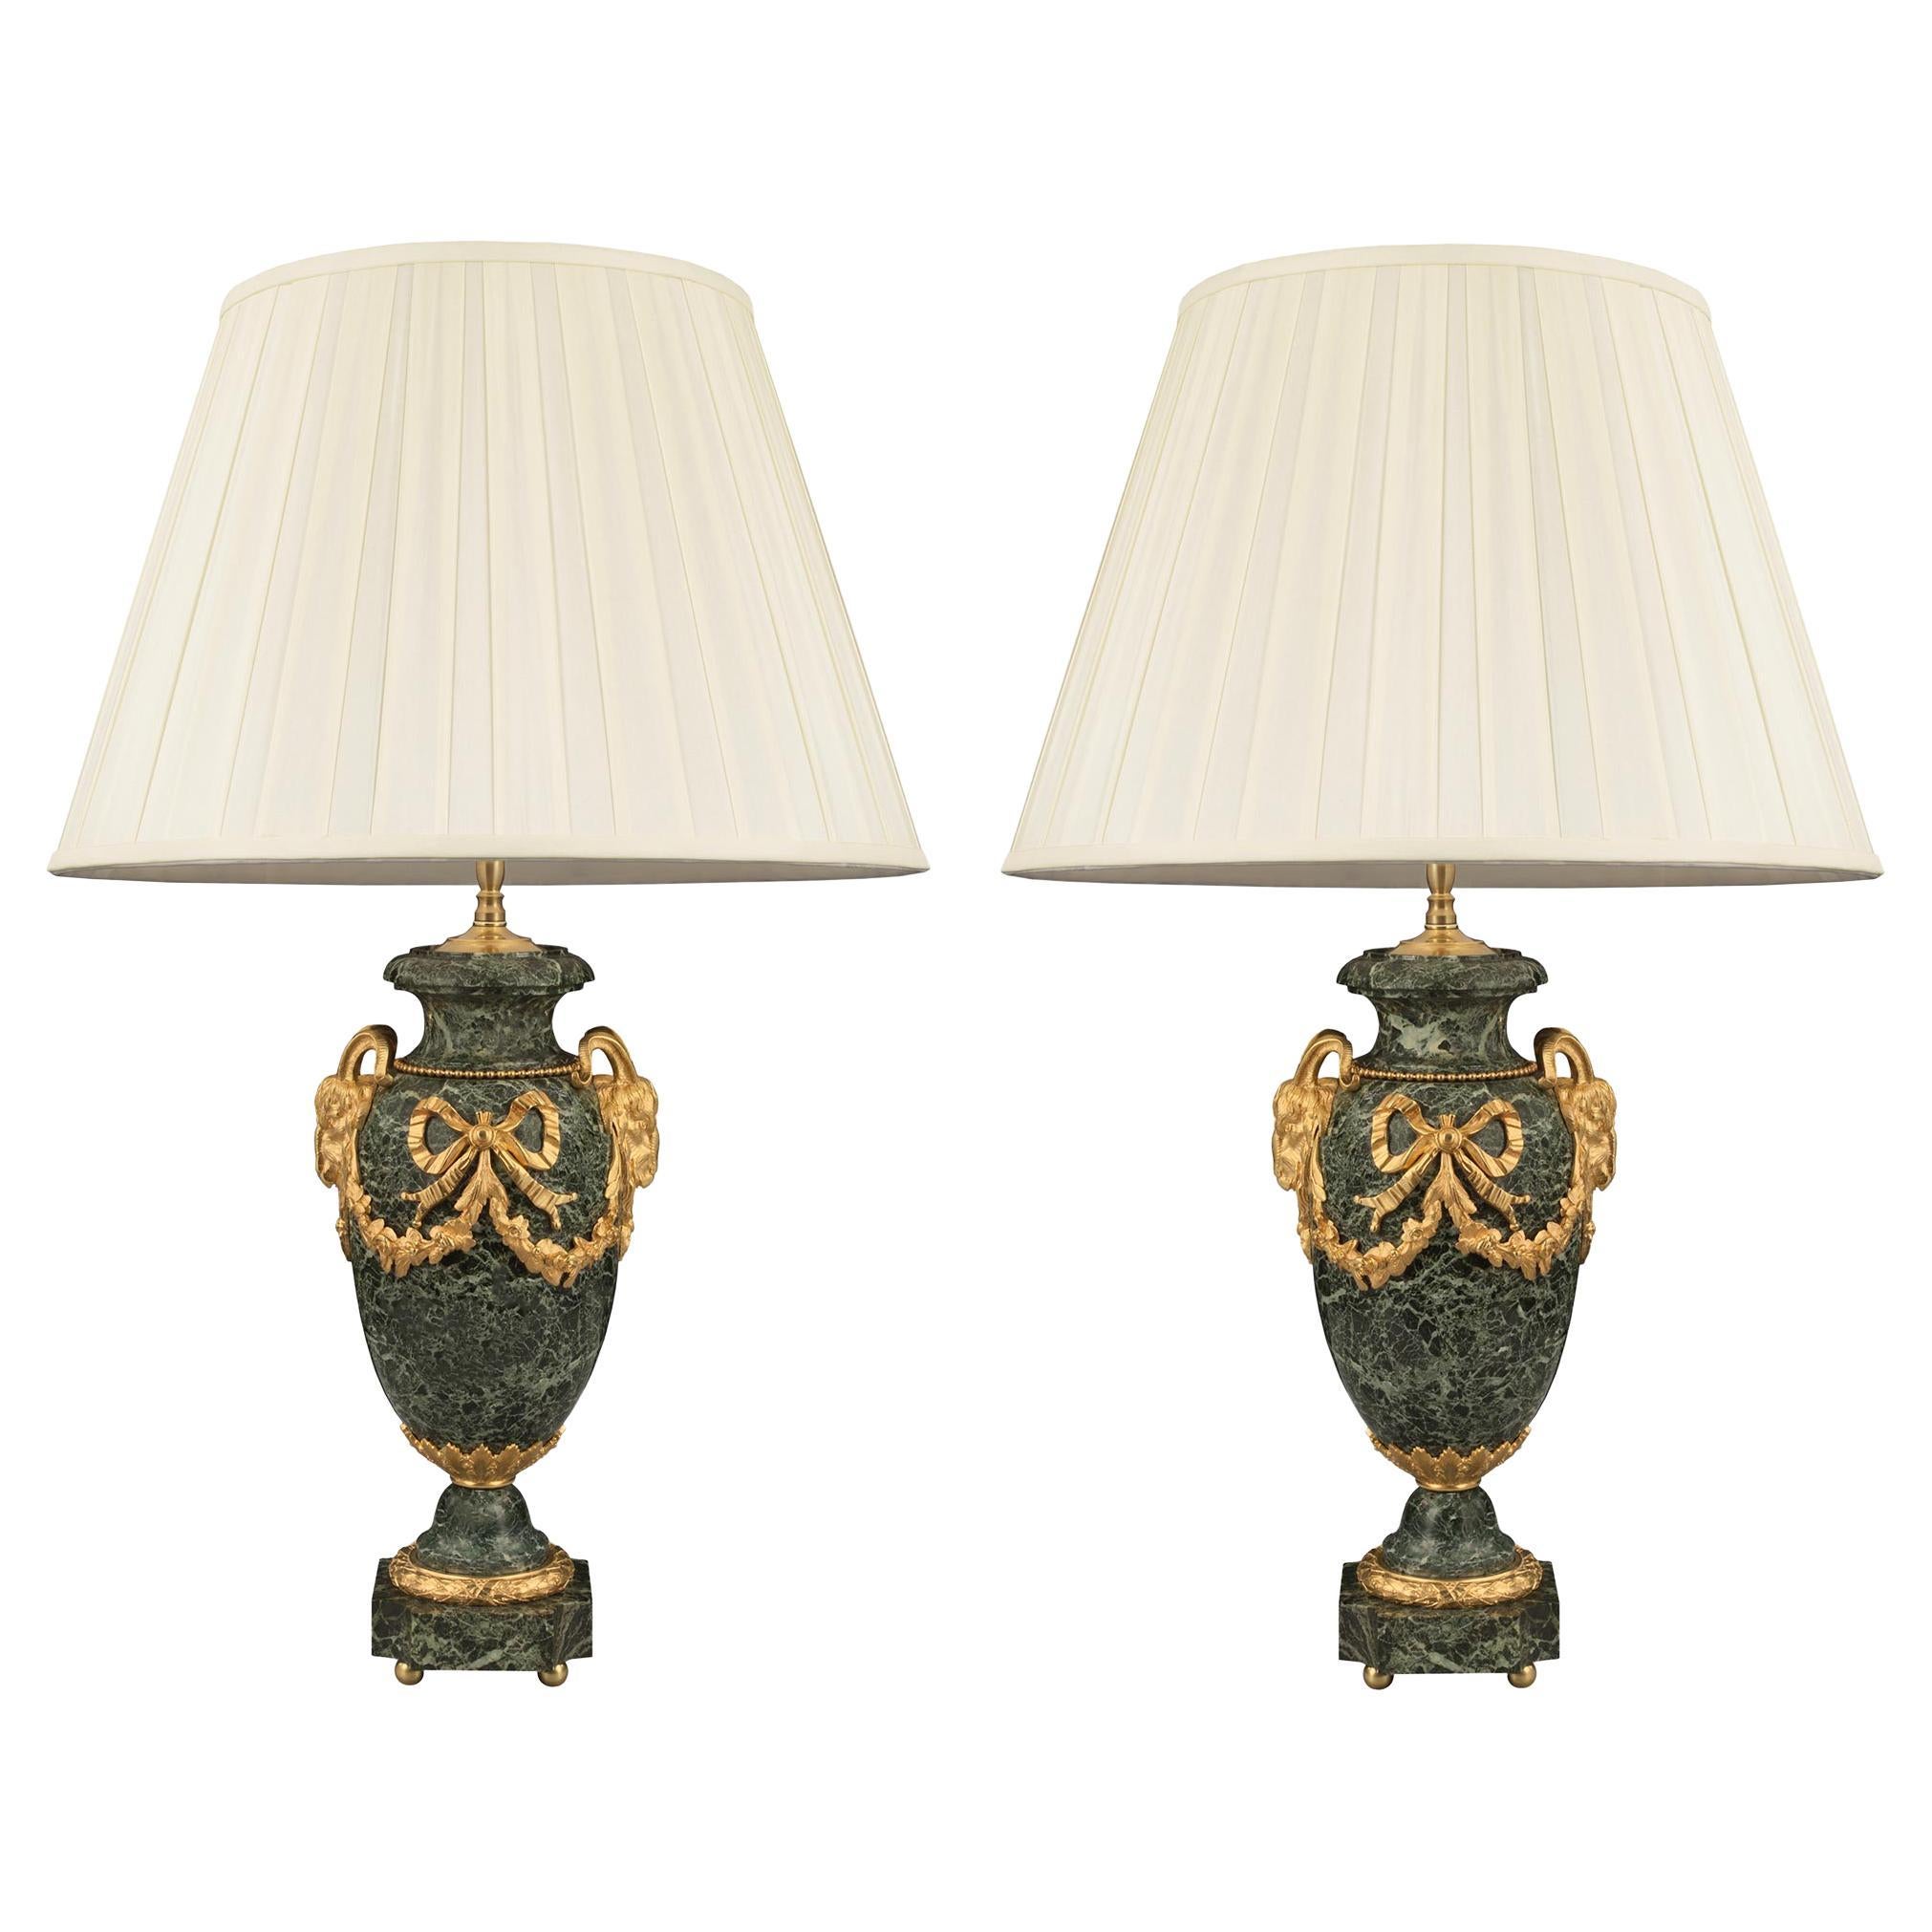 Pair of French Mid-19th Century Louis XVI Style Marble and Ormolu Lamps